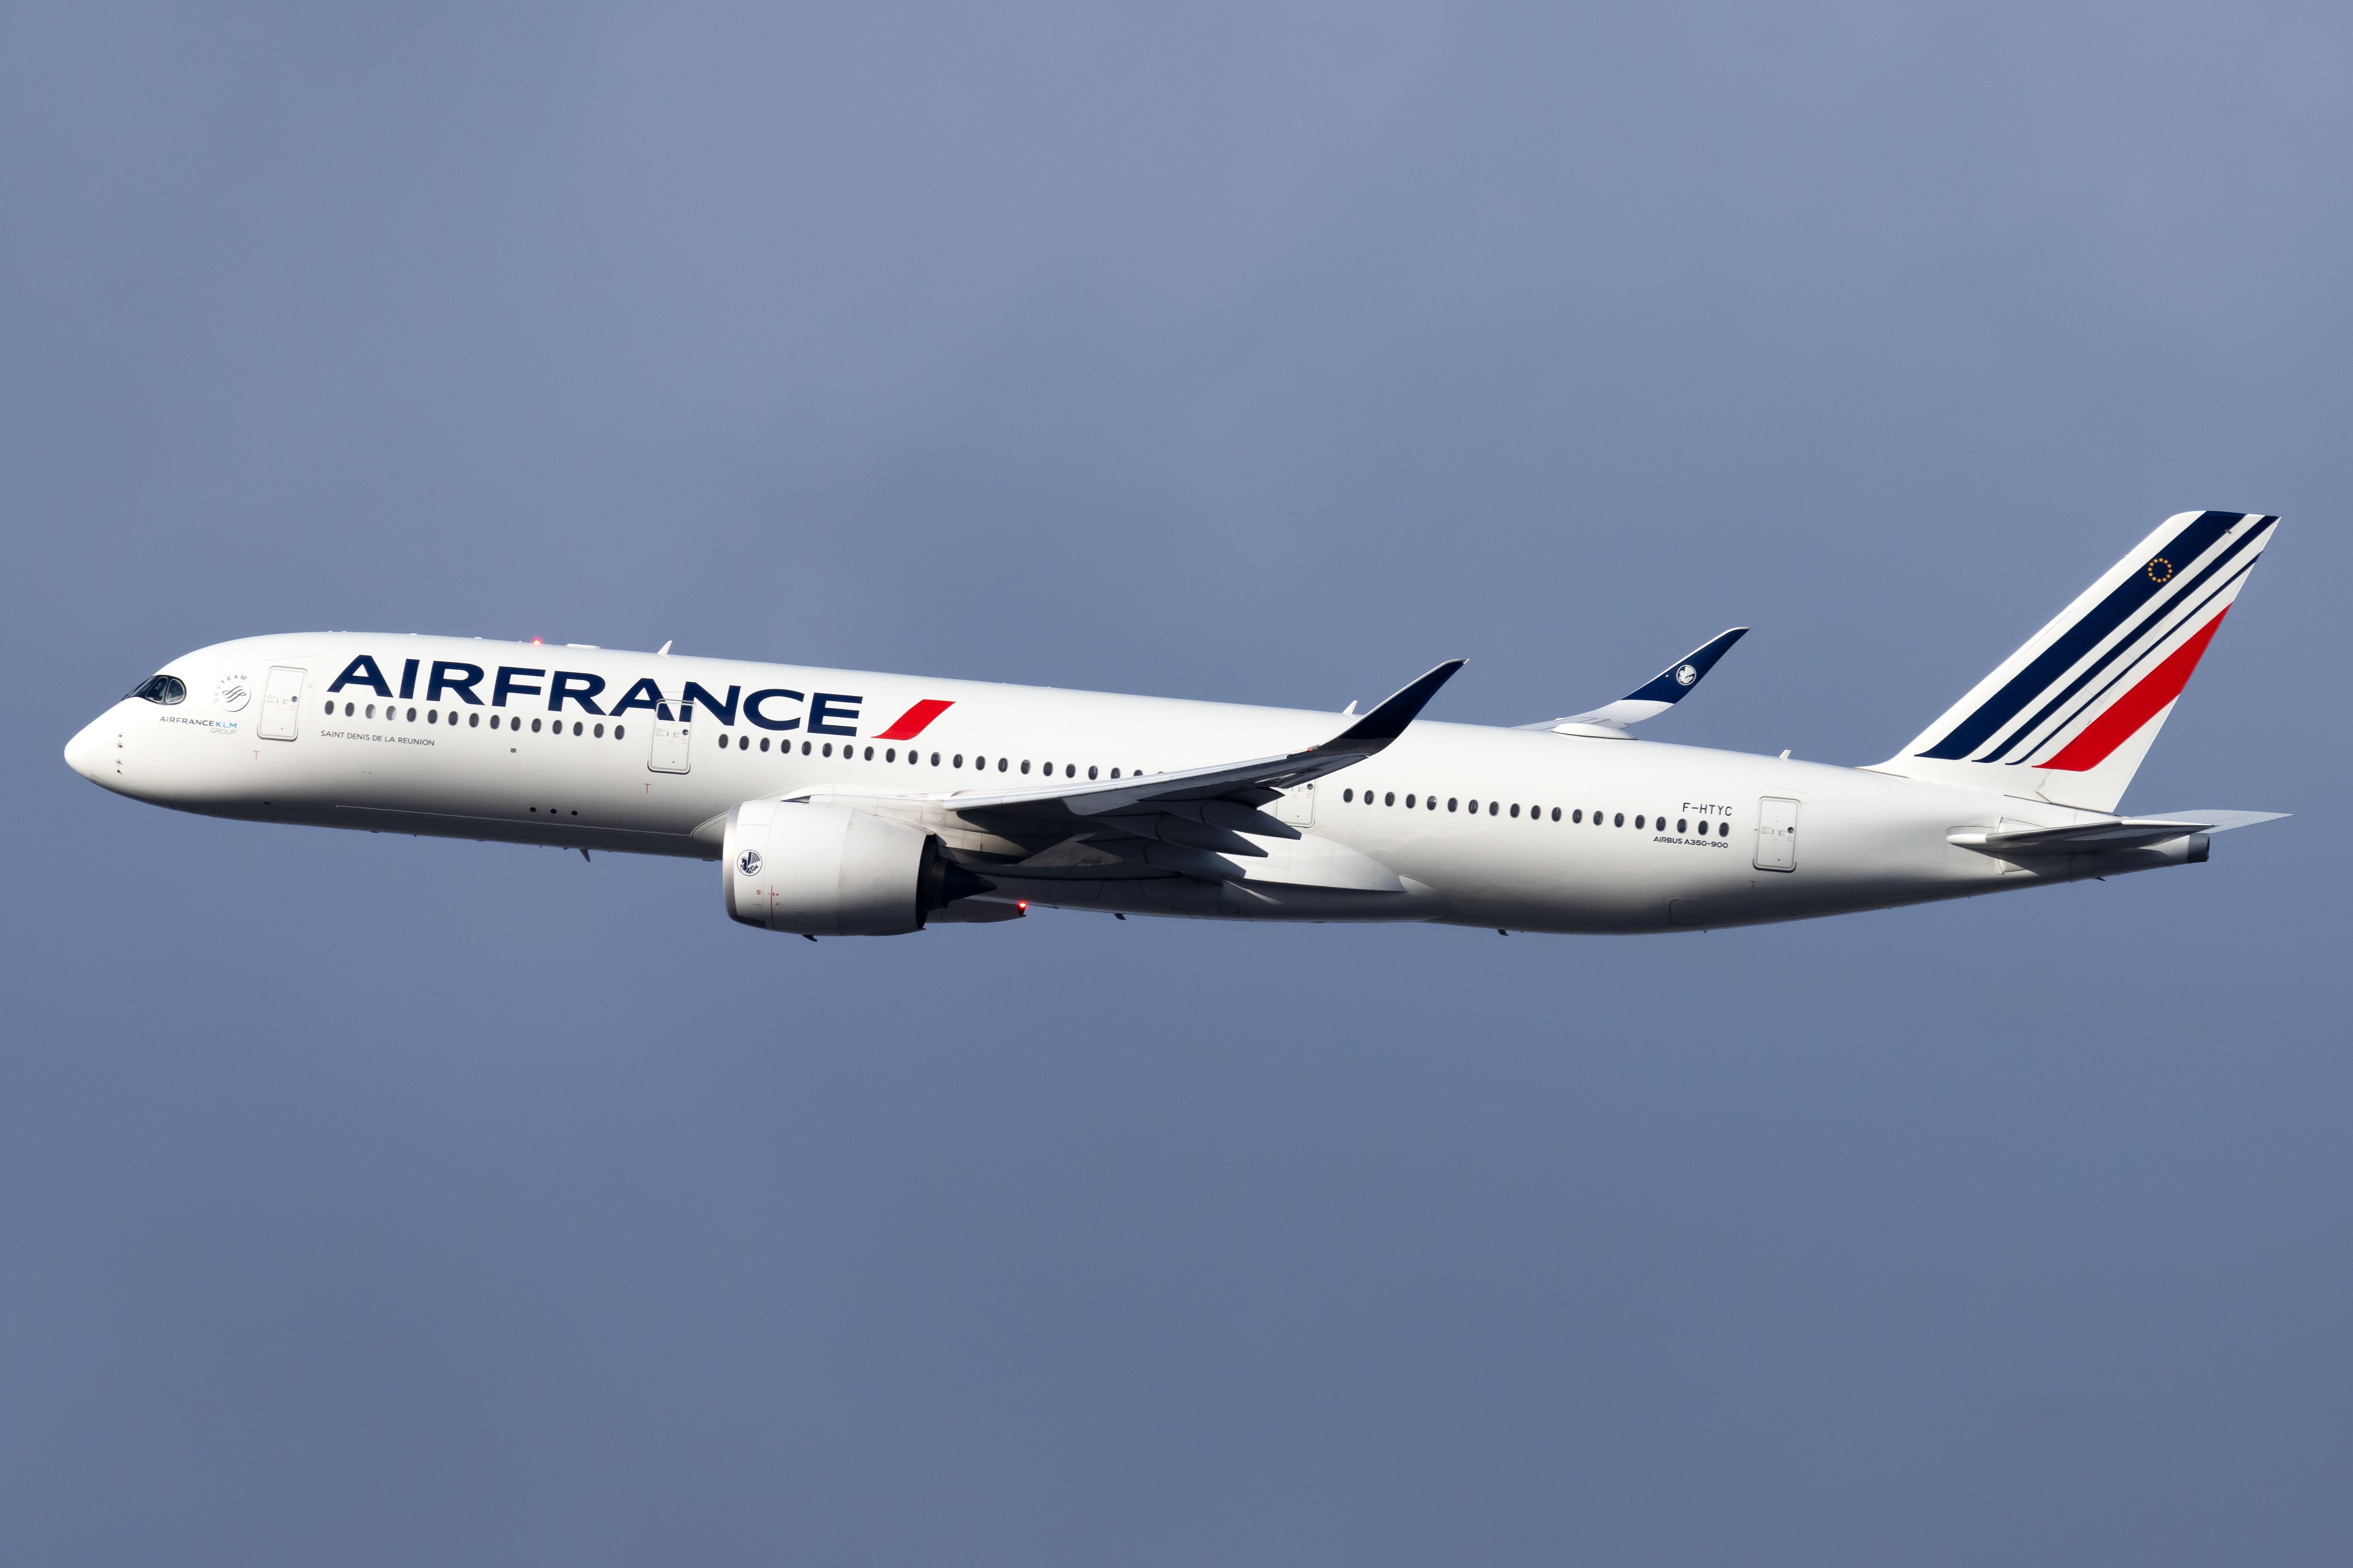 An Air France A350 flying in the sky.